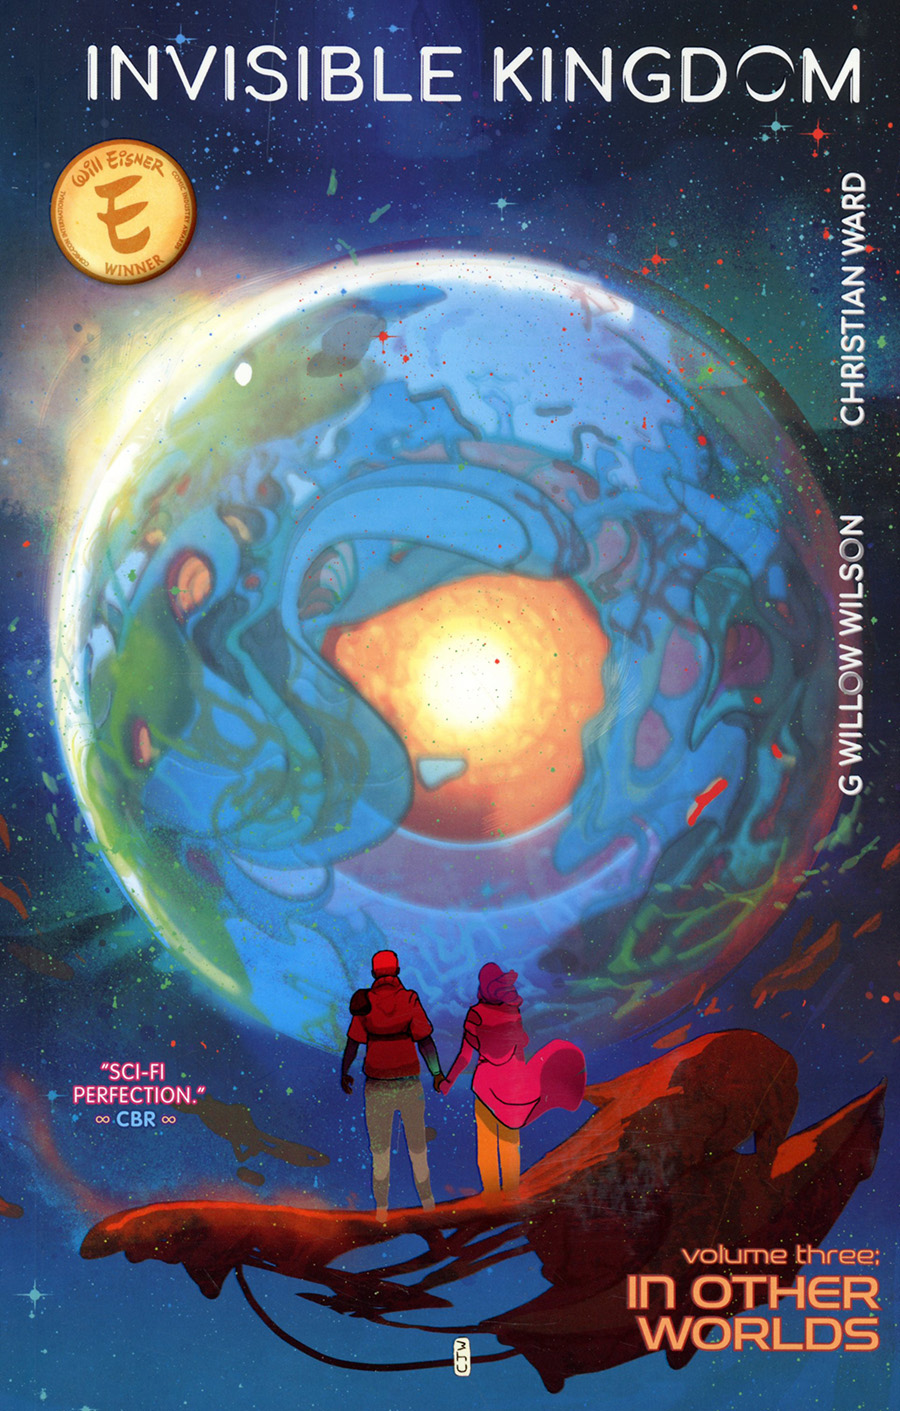 Invisible Kingdom Vol 3 In Other Worlds TP